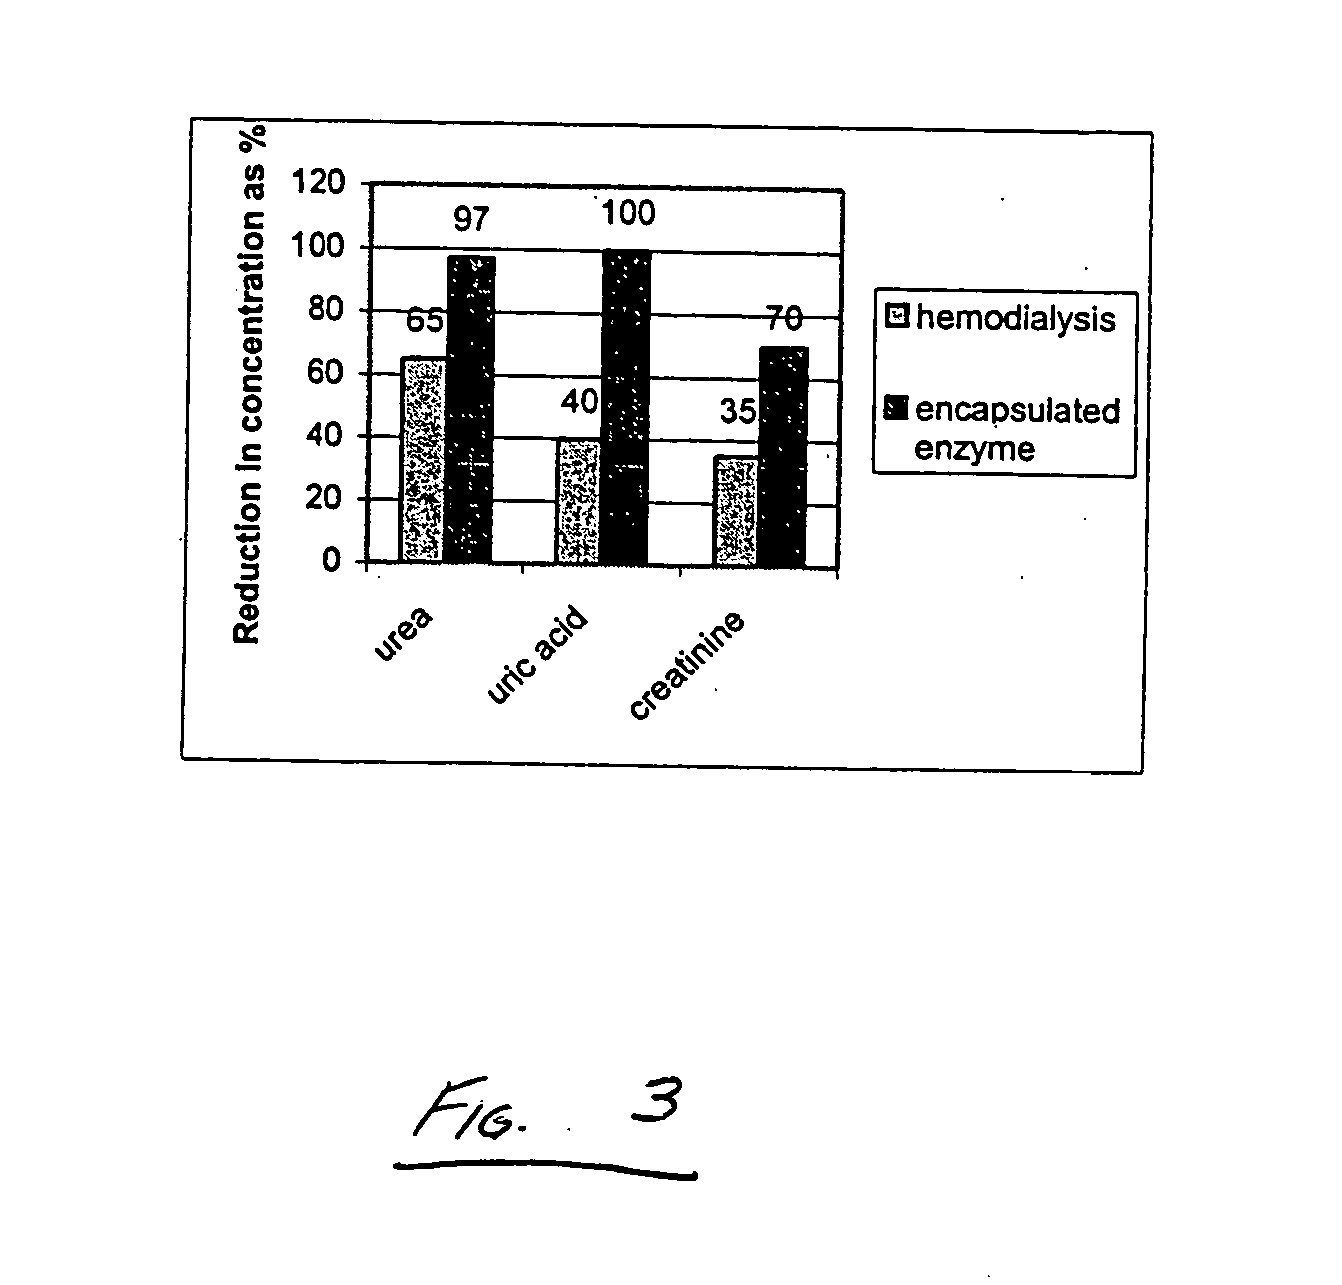 Systems and methods related to degradation of uremic toxins